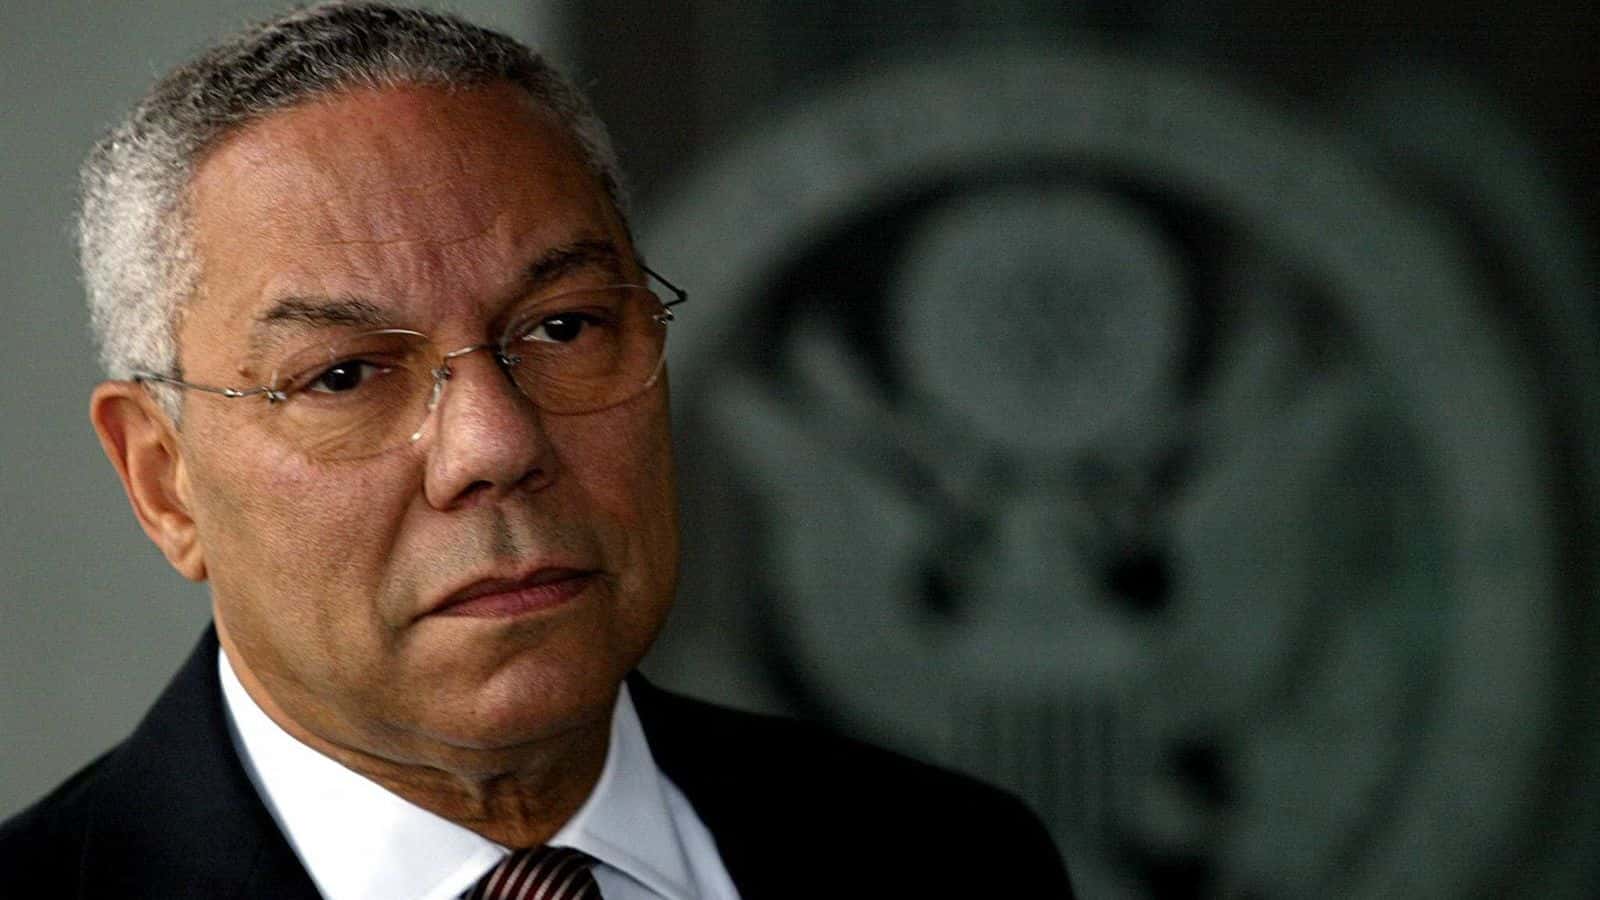 Colin Powell, first Black US secretary of state, passes away_40.1